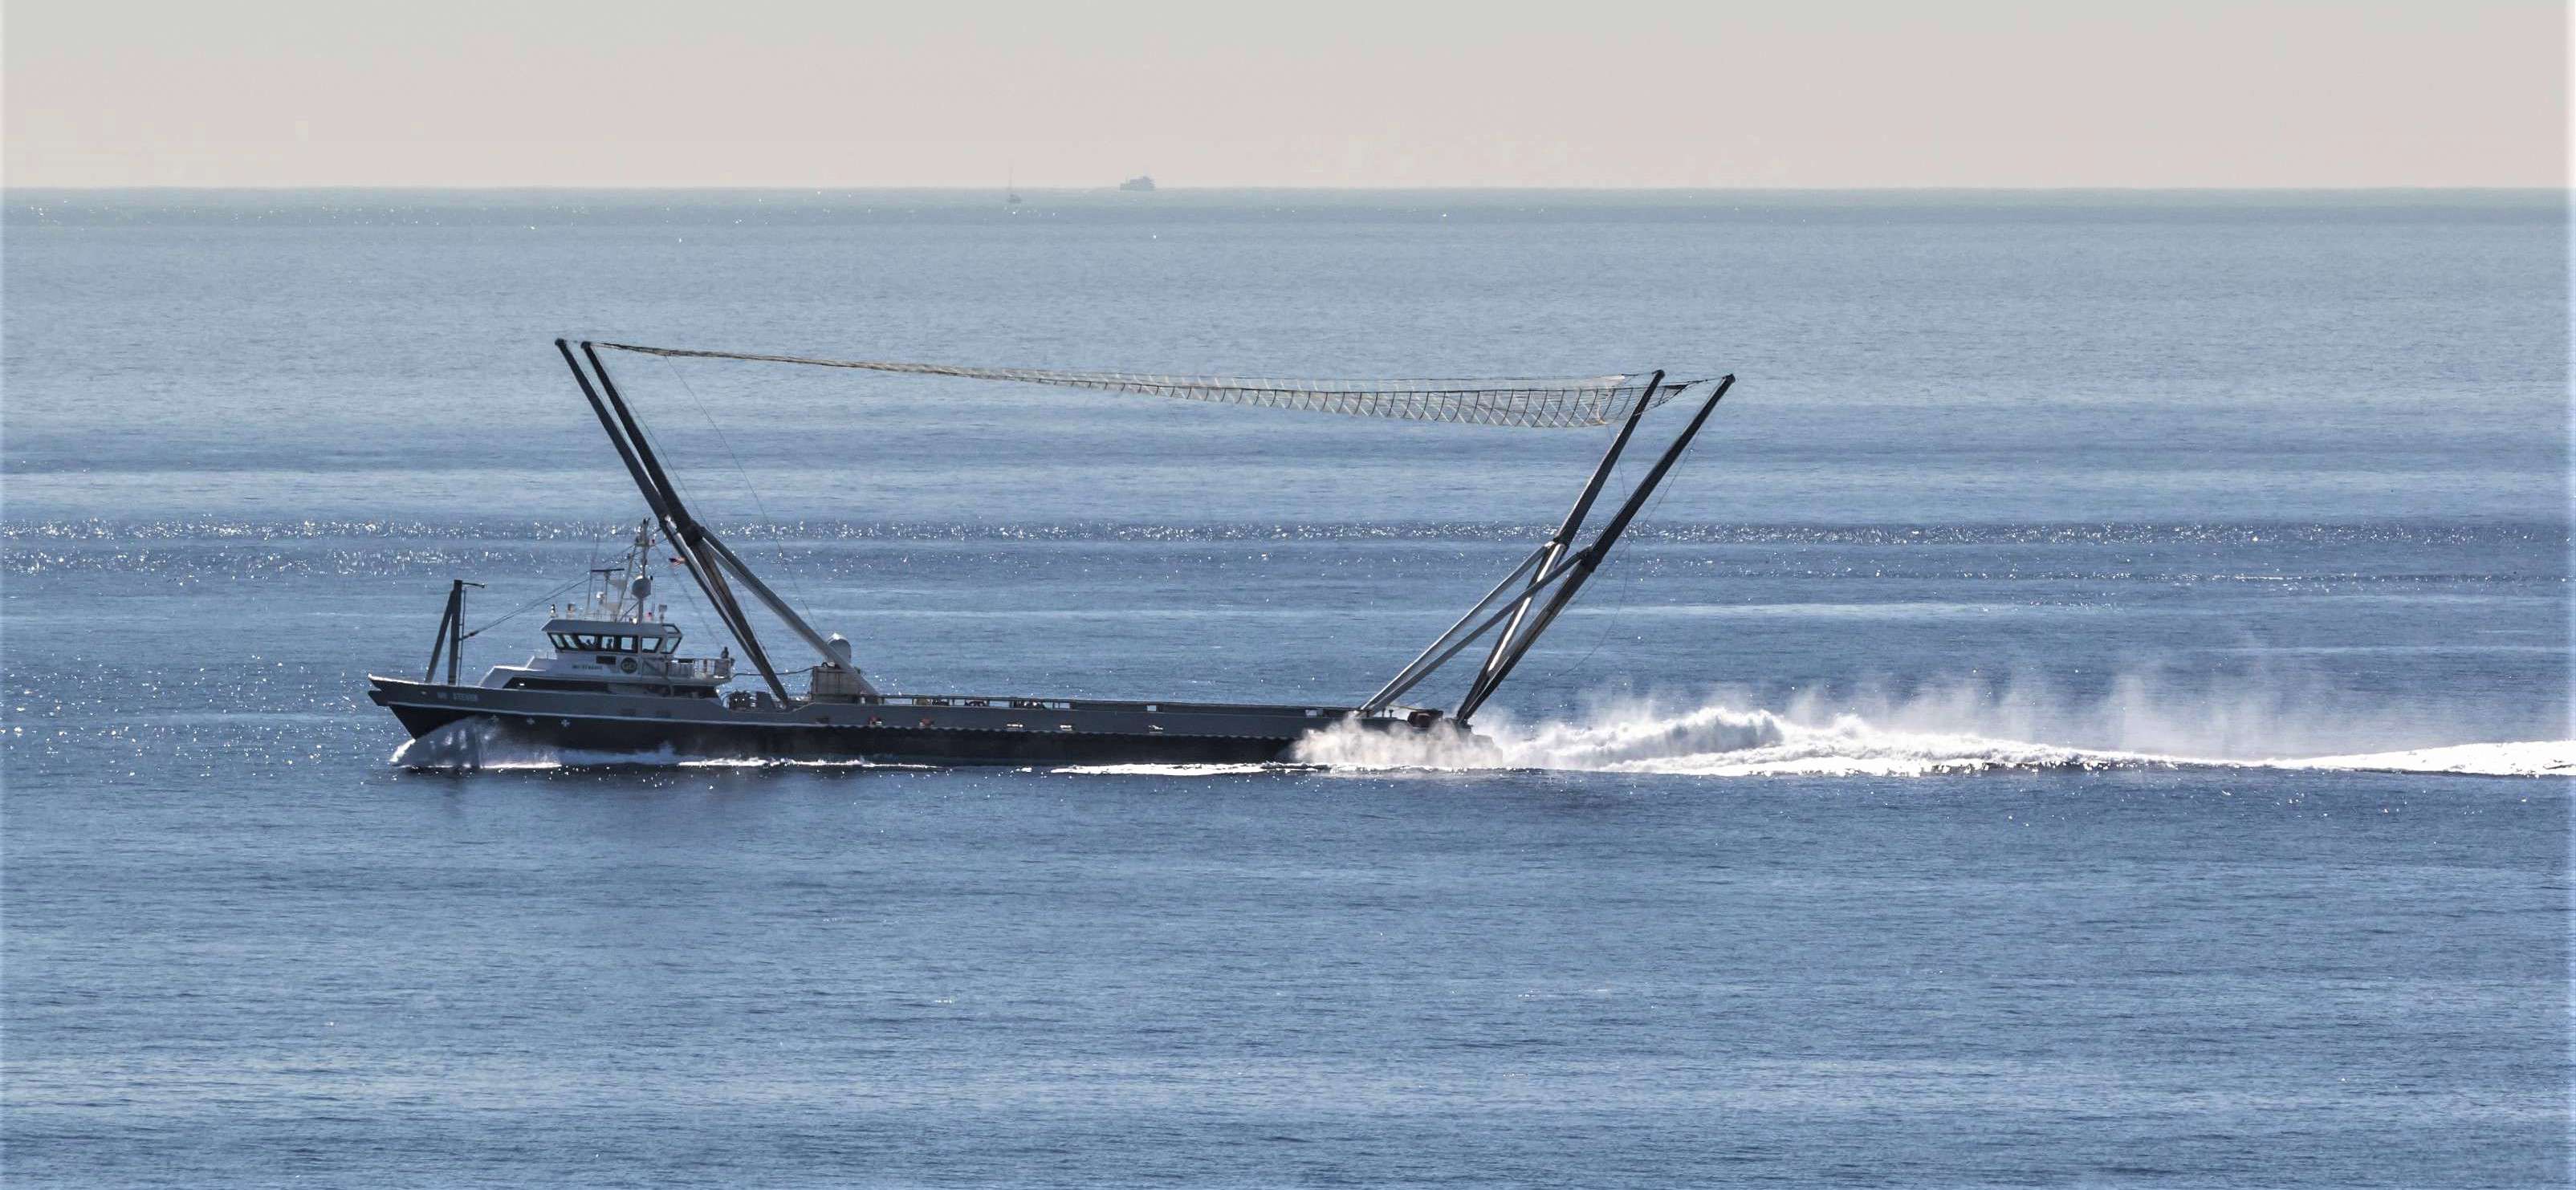 SpaceX Fairing Logo - SpaceX Falcon fairing recovery vessel Mr. Steven tests out new limbs ...